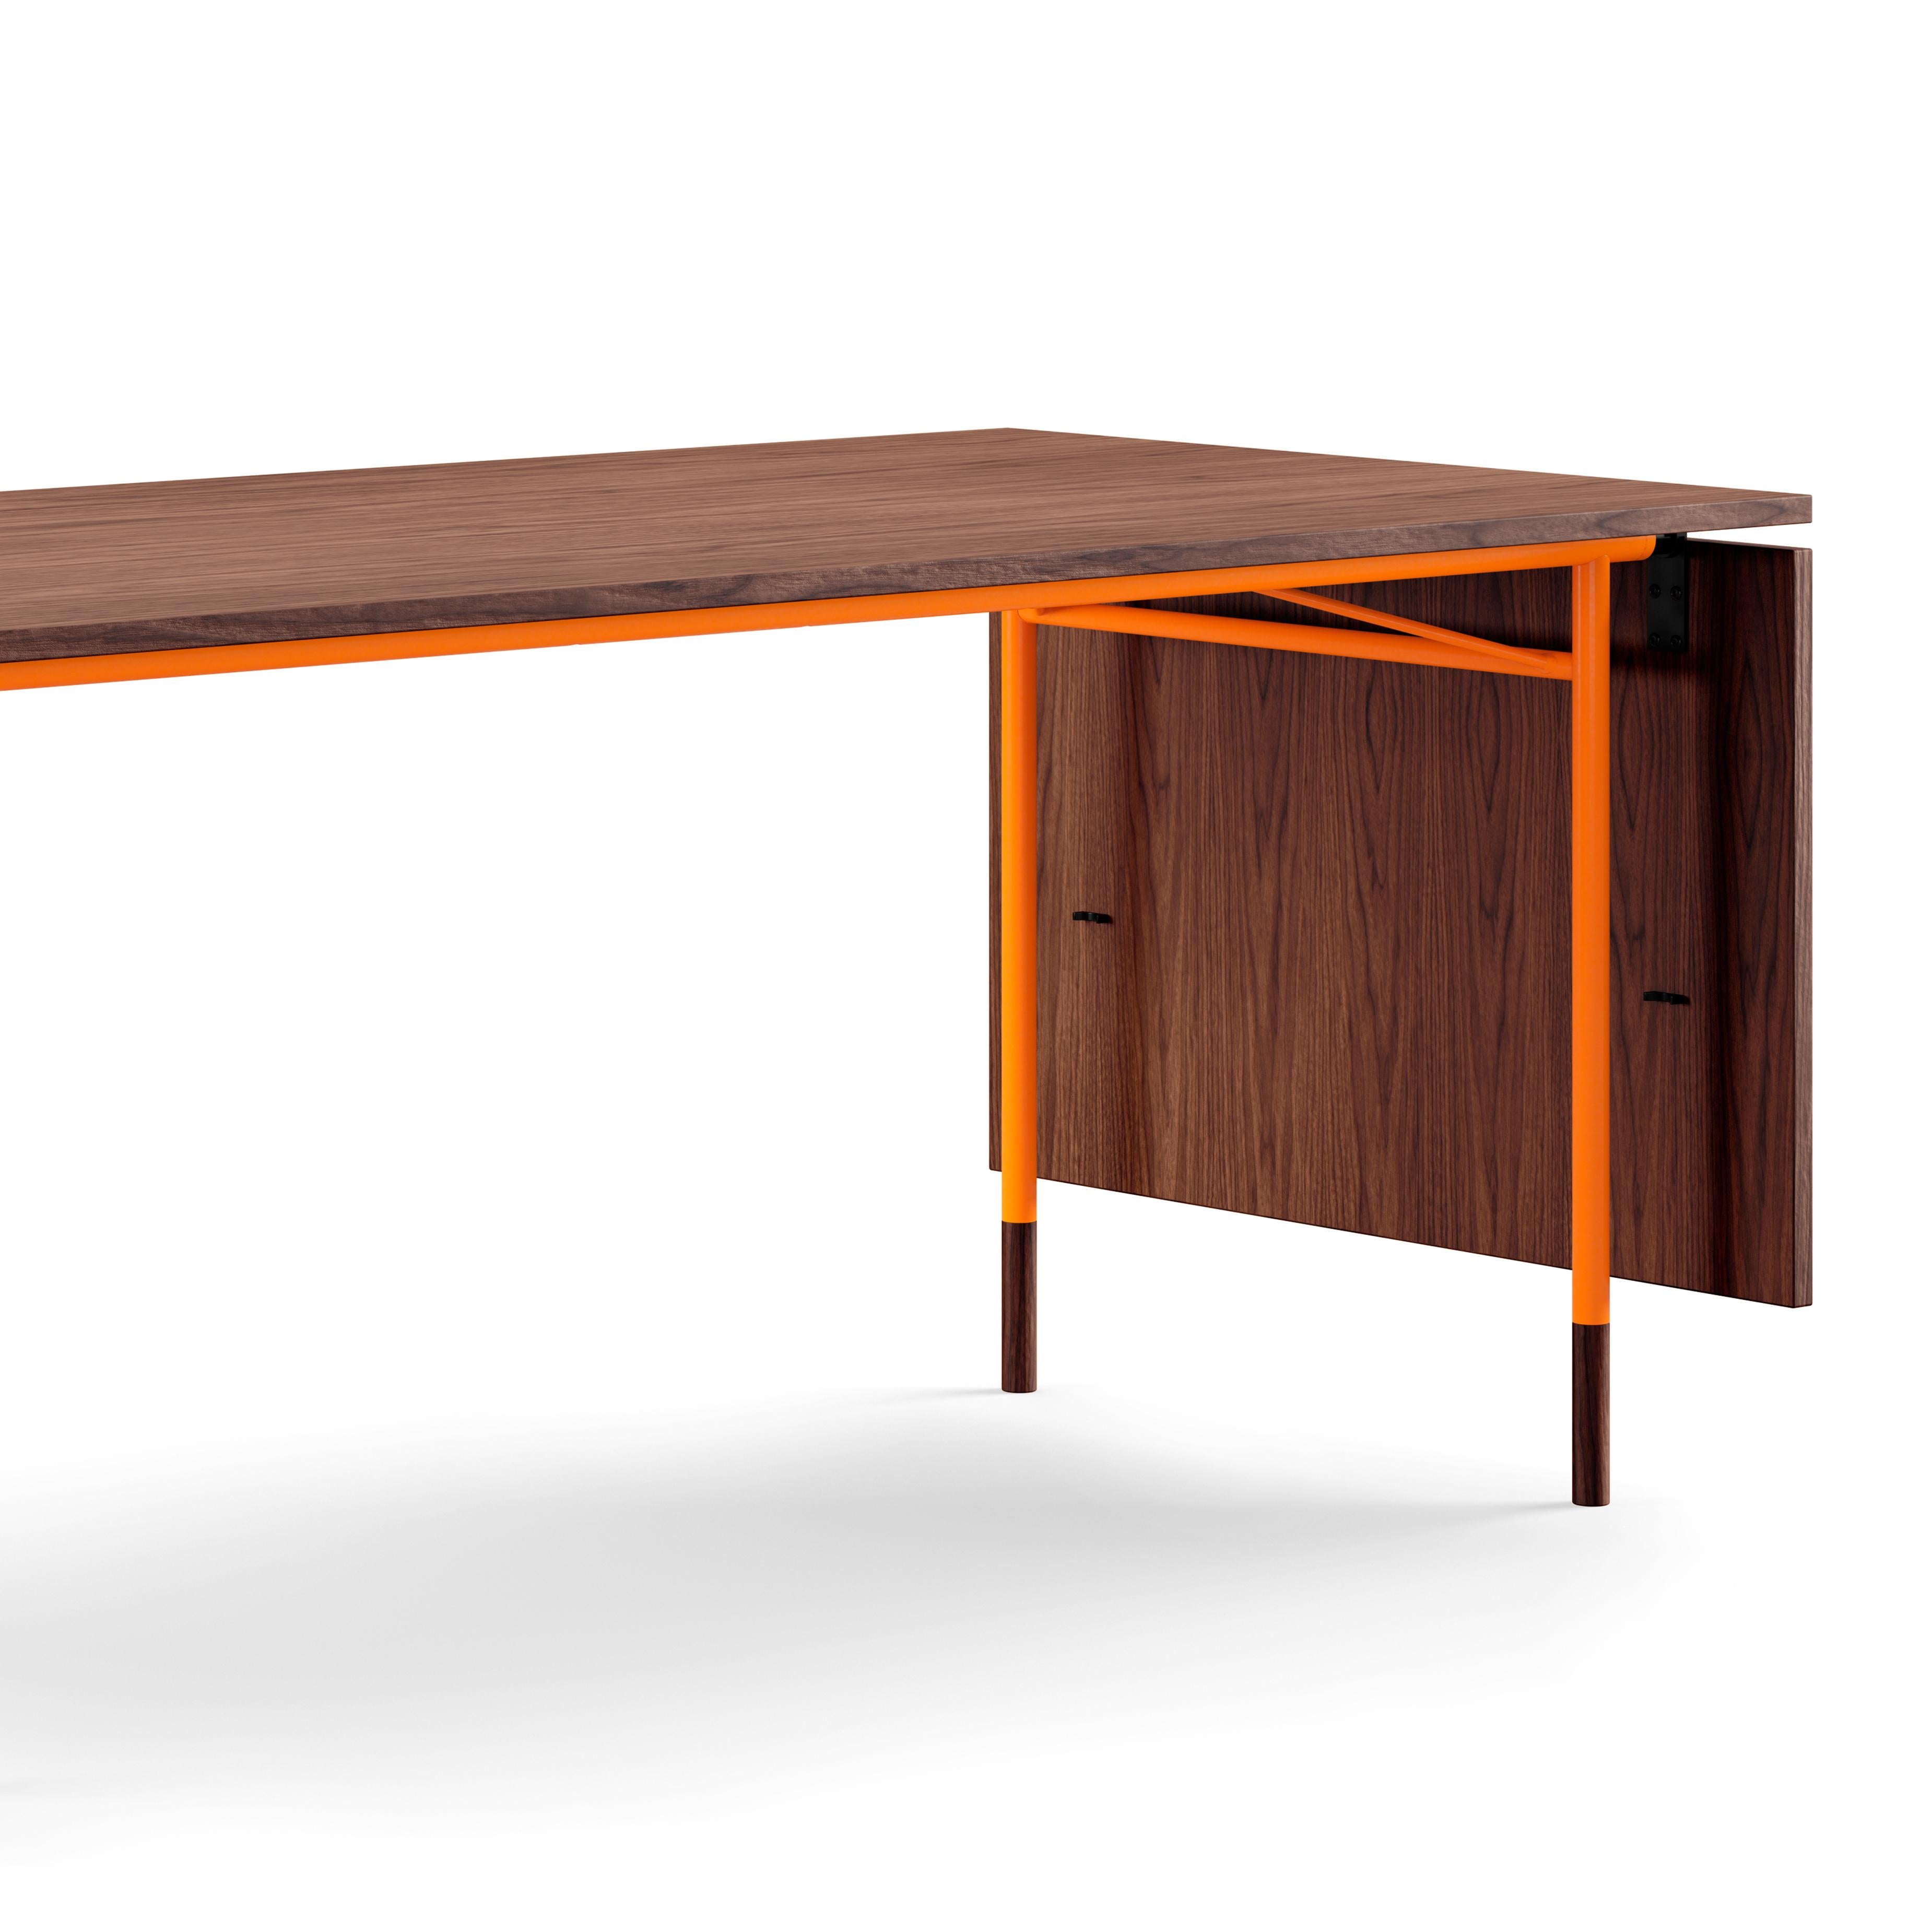 Steel Finn Juhl Nyhavn Dining Table with Two Drop Leaves, Lino and Wood